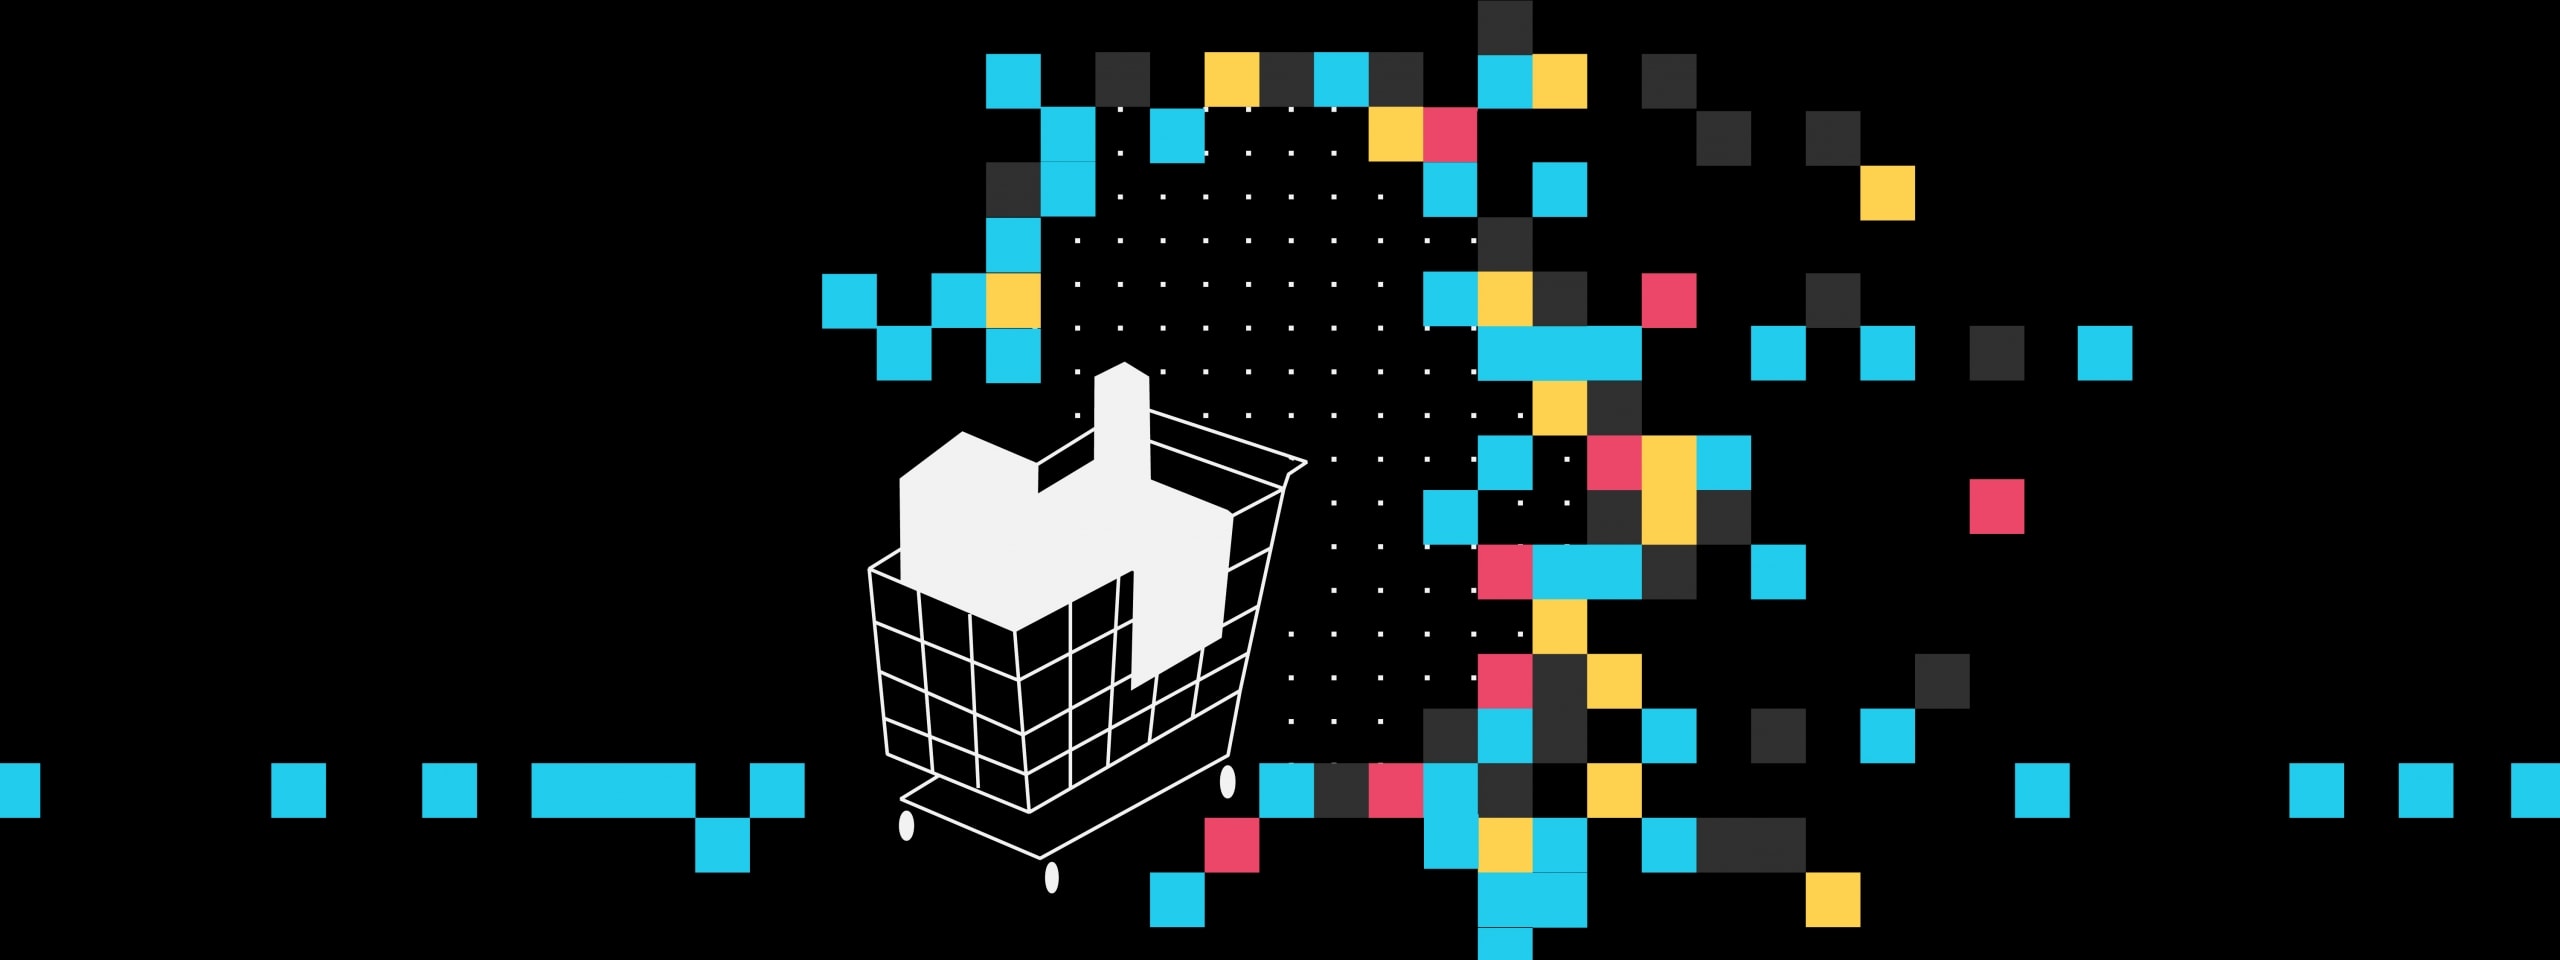 Graphics created from squares and a shopping cart